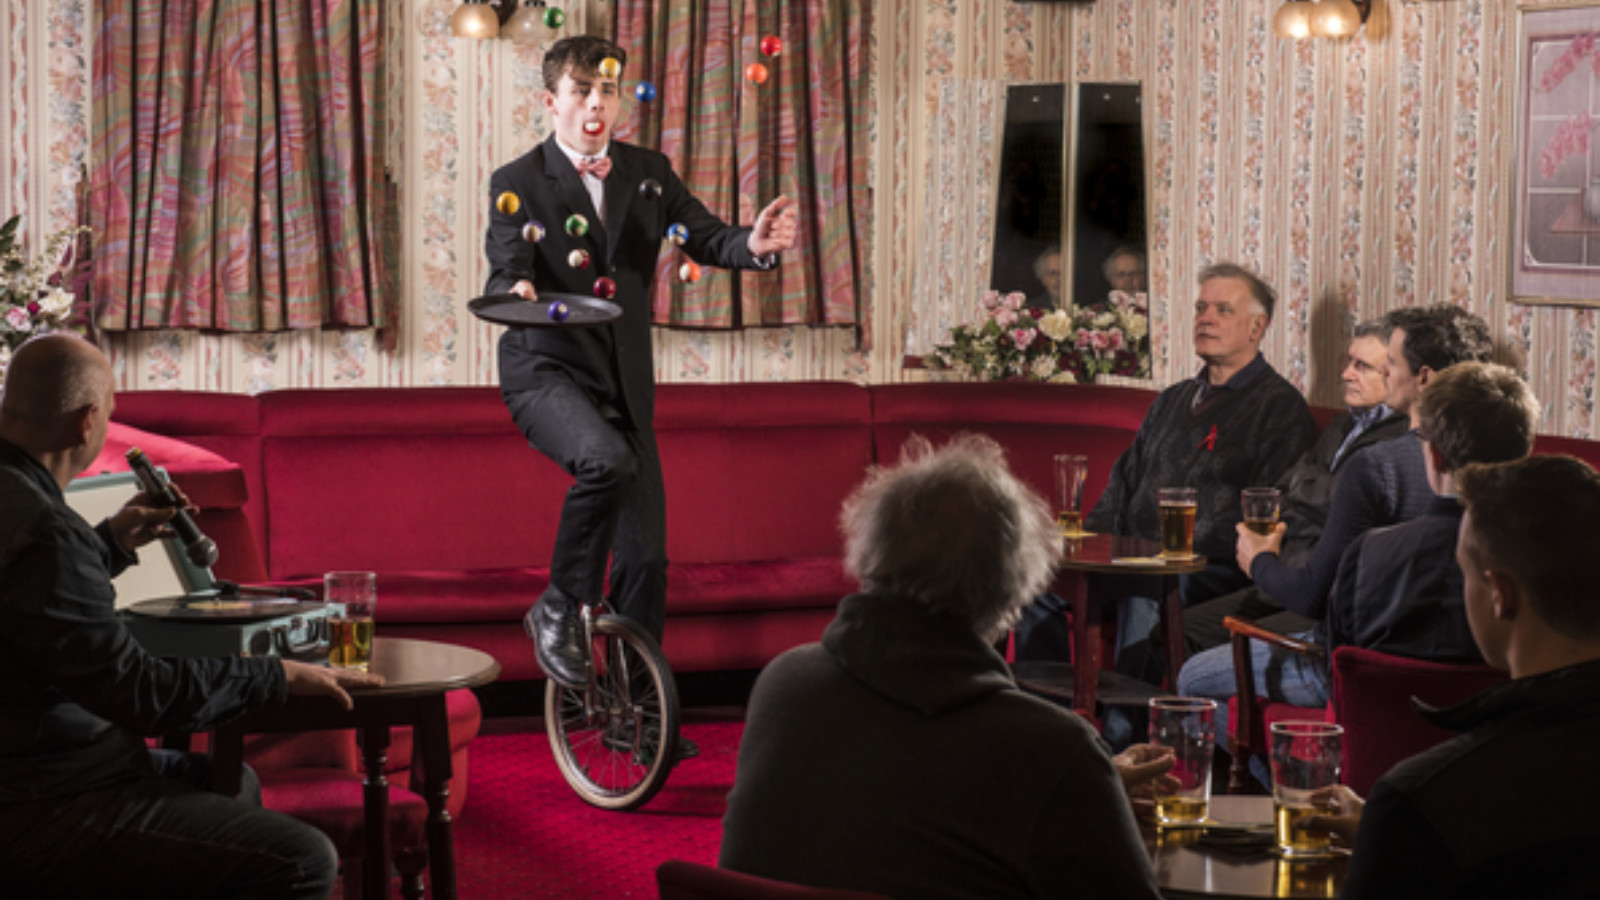 A group of men sit in a pub lounge. The seats and carpet are vibrant, deep red. There are pink and red flowery curtains and walls. All the men look towards the centre of the room, where a young man rides a unicycle, holding a bar tray and juggling a set of snooker balls.